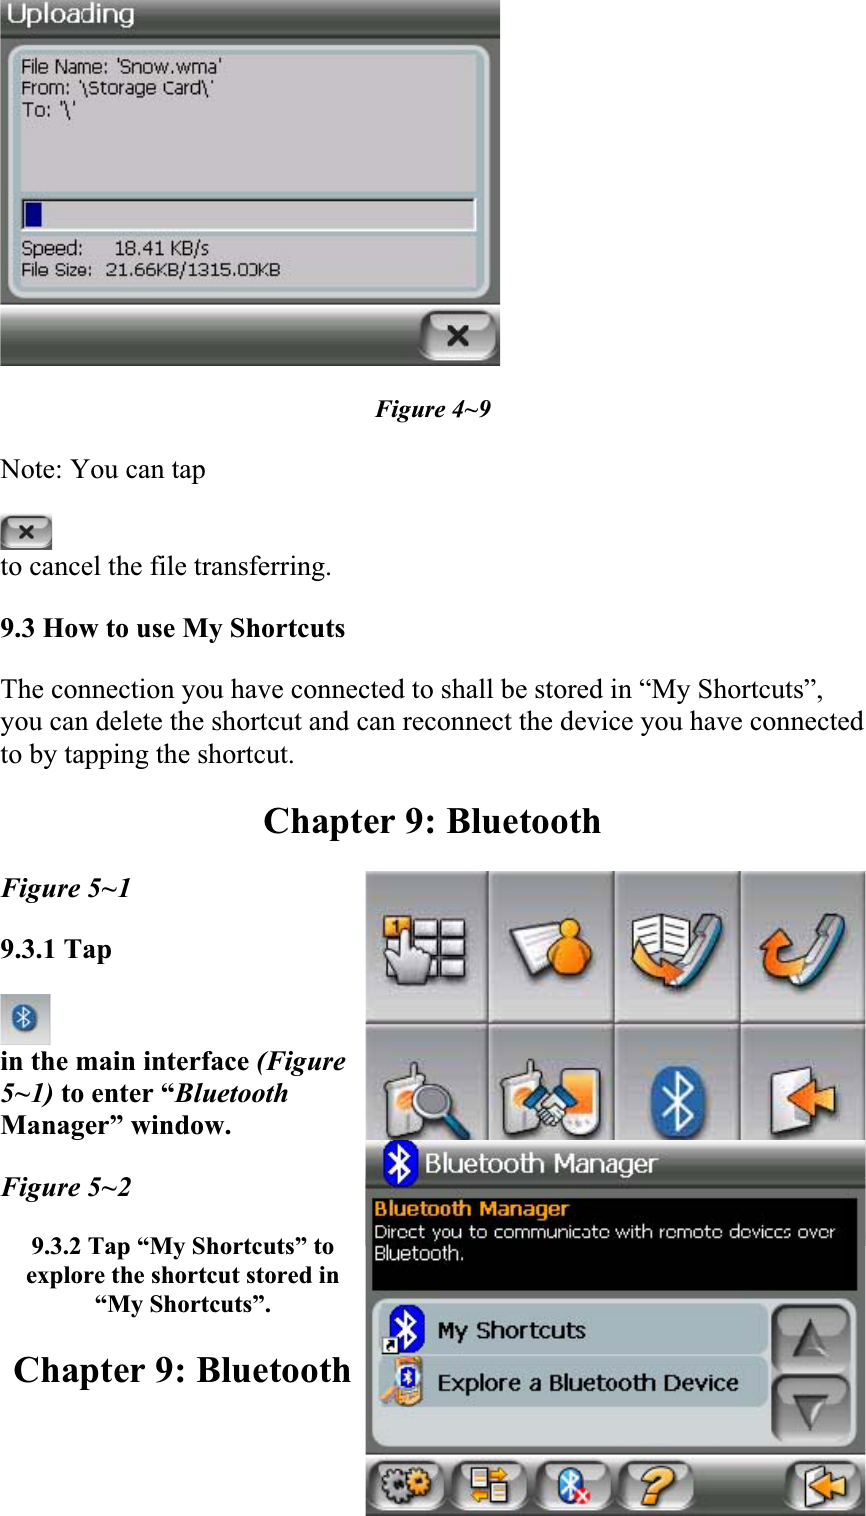 Figure 4~9 Note: You can tap  to cancel the file transferring.  9.3 How to use My Shortcuts  The connection you have connected to shall be stored in “My Shortcuts”, you can delete the shortcut and can reconnect the device you have connected to by tapping the shortcut.  Chapter 9: Bluetooth Figure 5~1 9.3.1 Tapin the main interface (Figure5~1) to enter “BluetoothManager” window.Figure 5~2 9.3.2 Tap “My Shortcuts” to explore the shortcut stored in “My Shortcuts”.Chapter 9: Bluetooth 